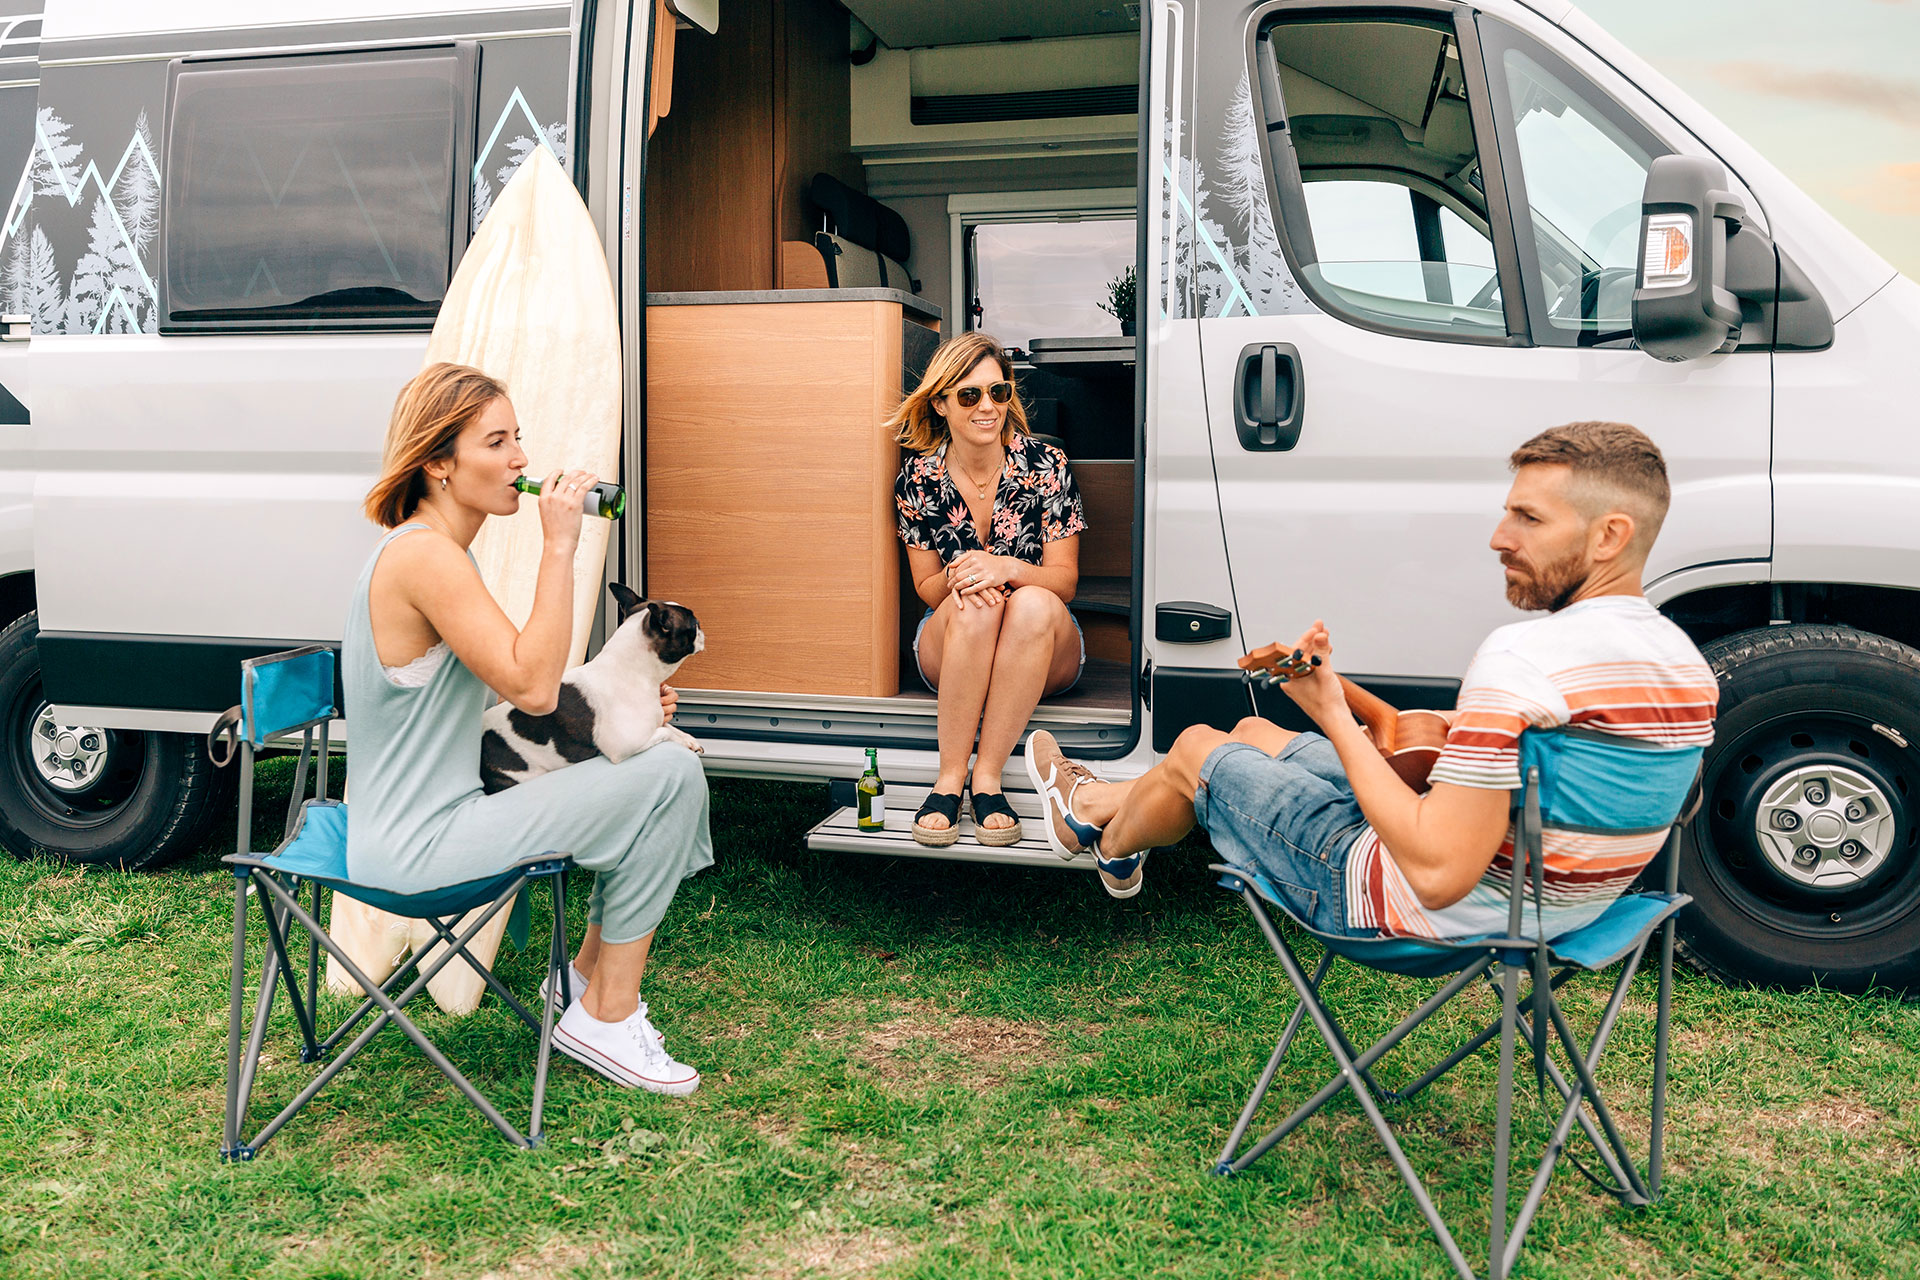 Camper Vans: The Road to Creative Work and Recreation